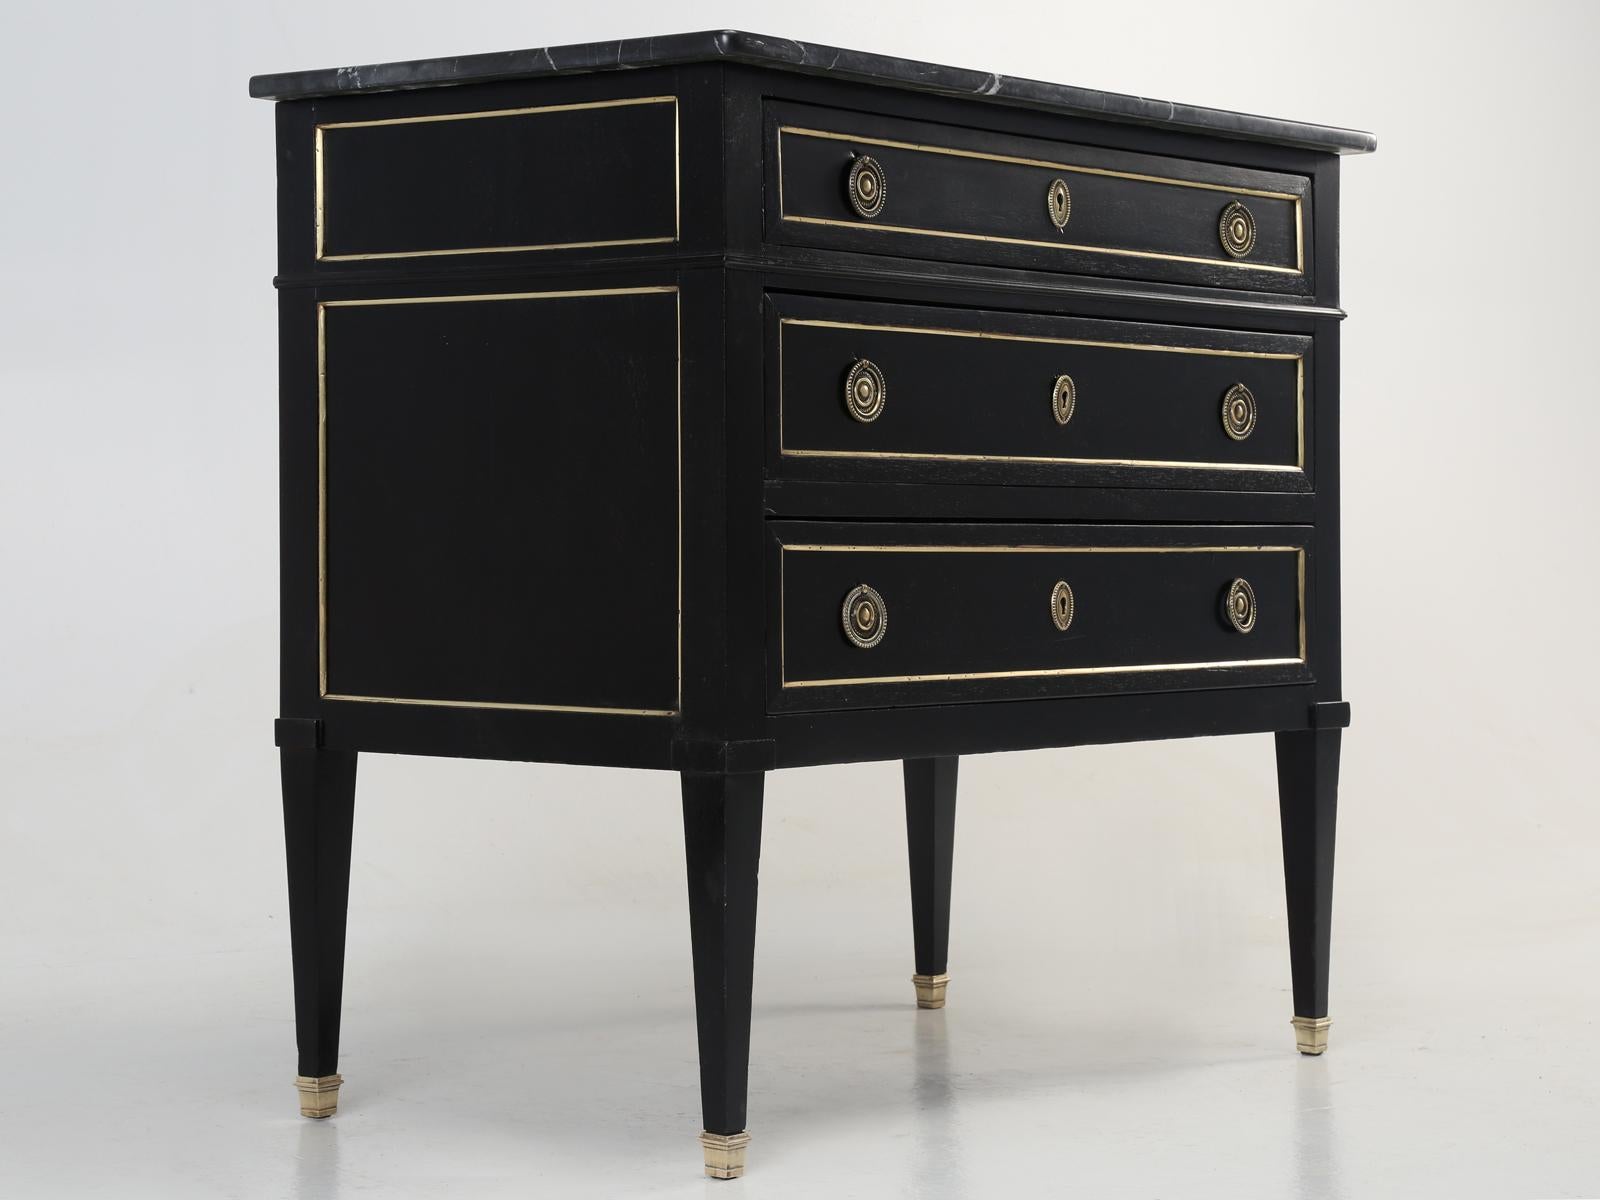 Antique French Directoire commode from the mid-1800s. Our Old Plank finishing department hand-scrapped the entire antique French petite commode, without the use of any chemicals and applied an authentic ebonized finish. The marble top is free from